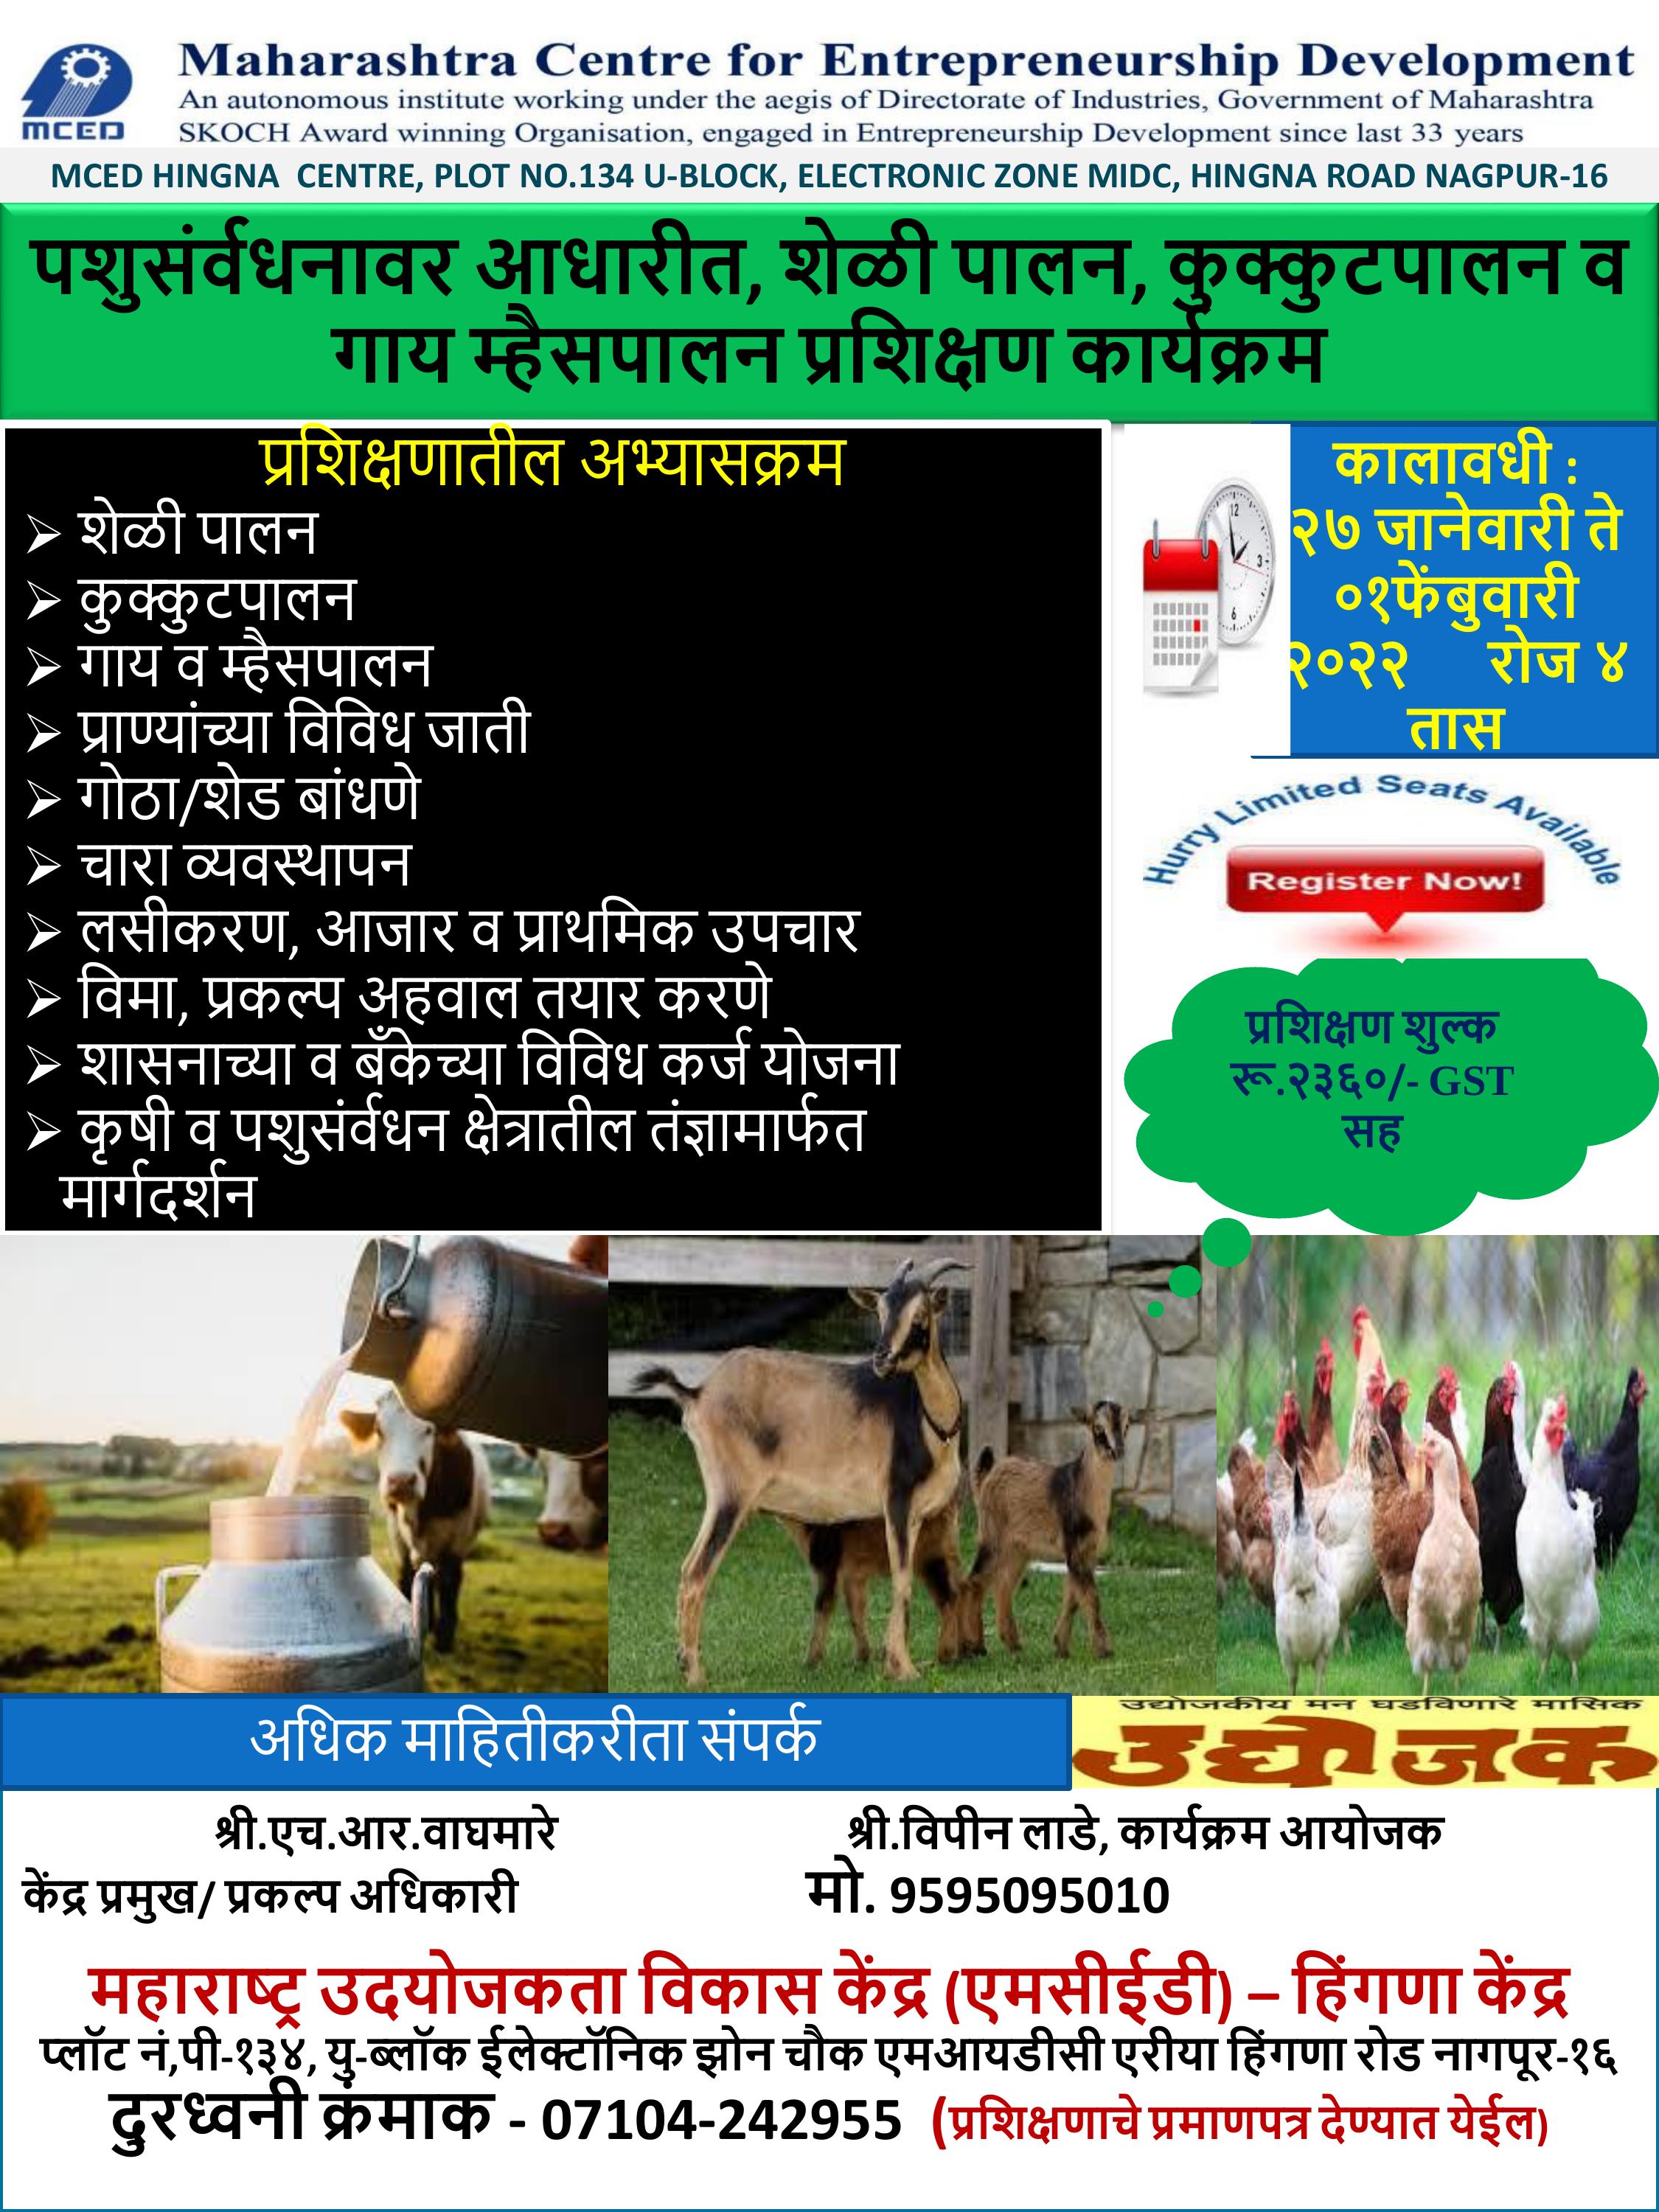 Training Programme on Goat, Poultry, Cow Farming